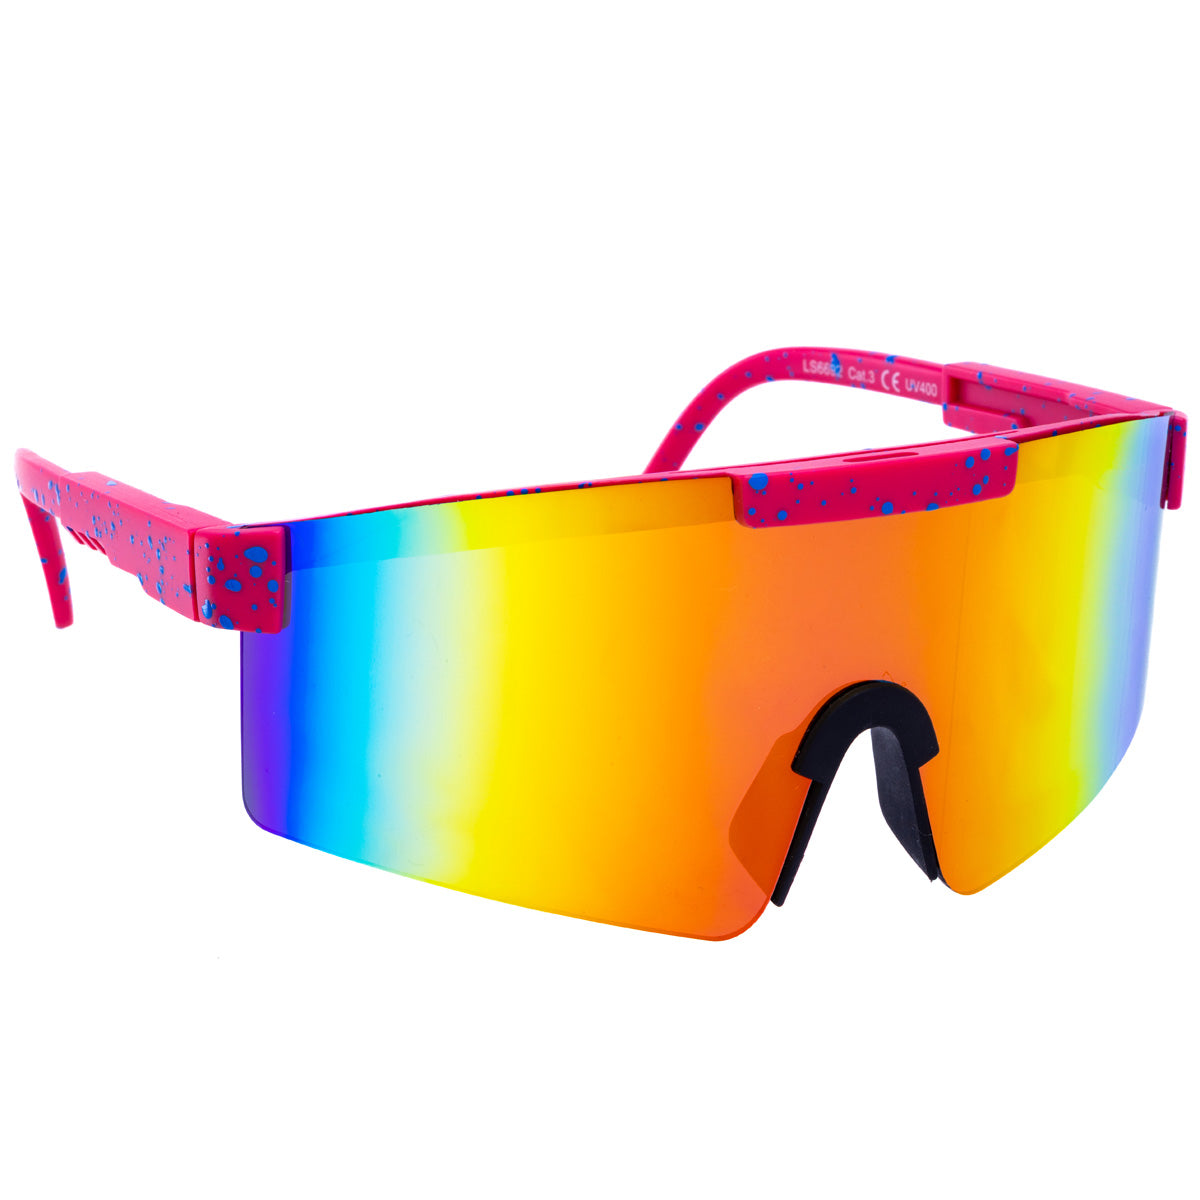 Sporty colorful sunglasses with mirrored lenses